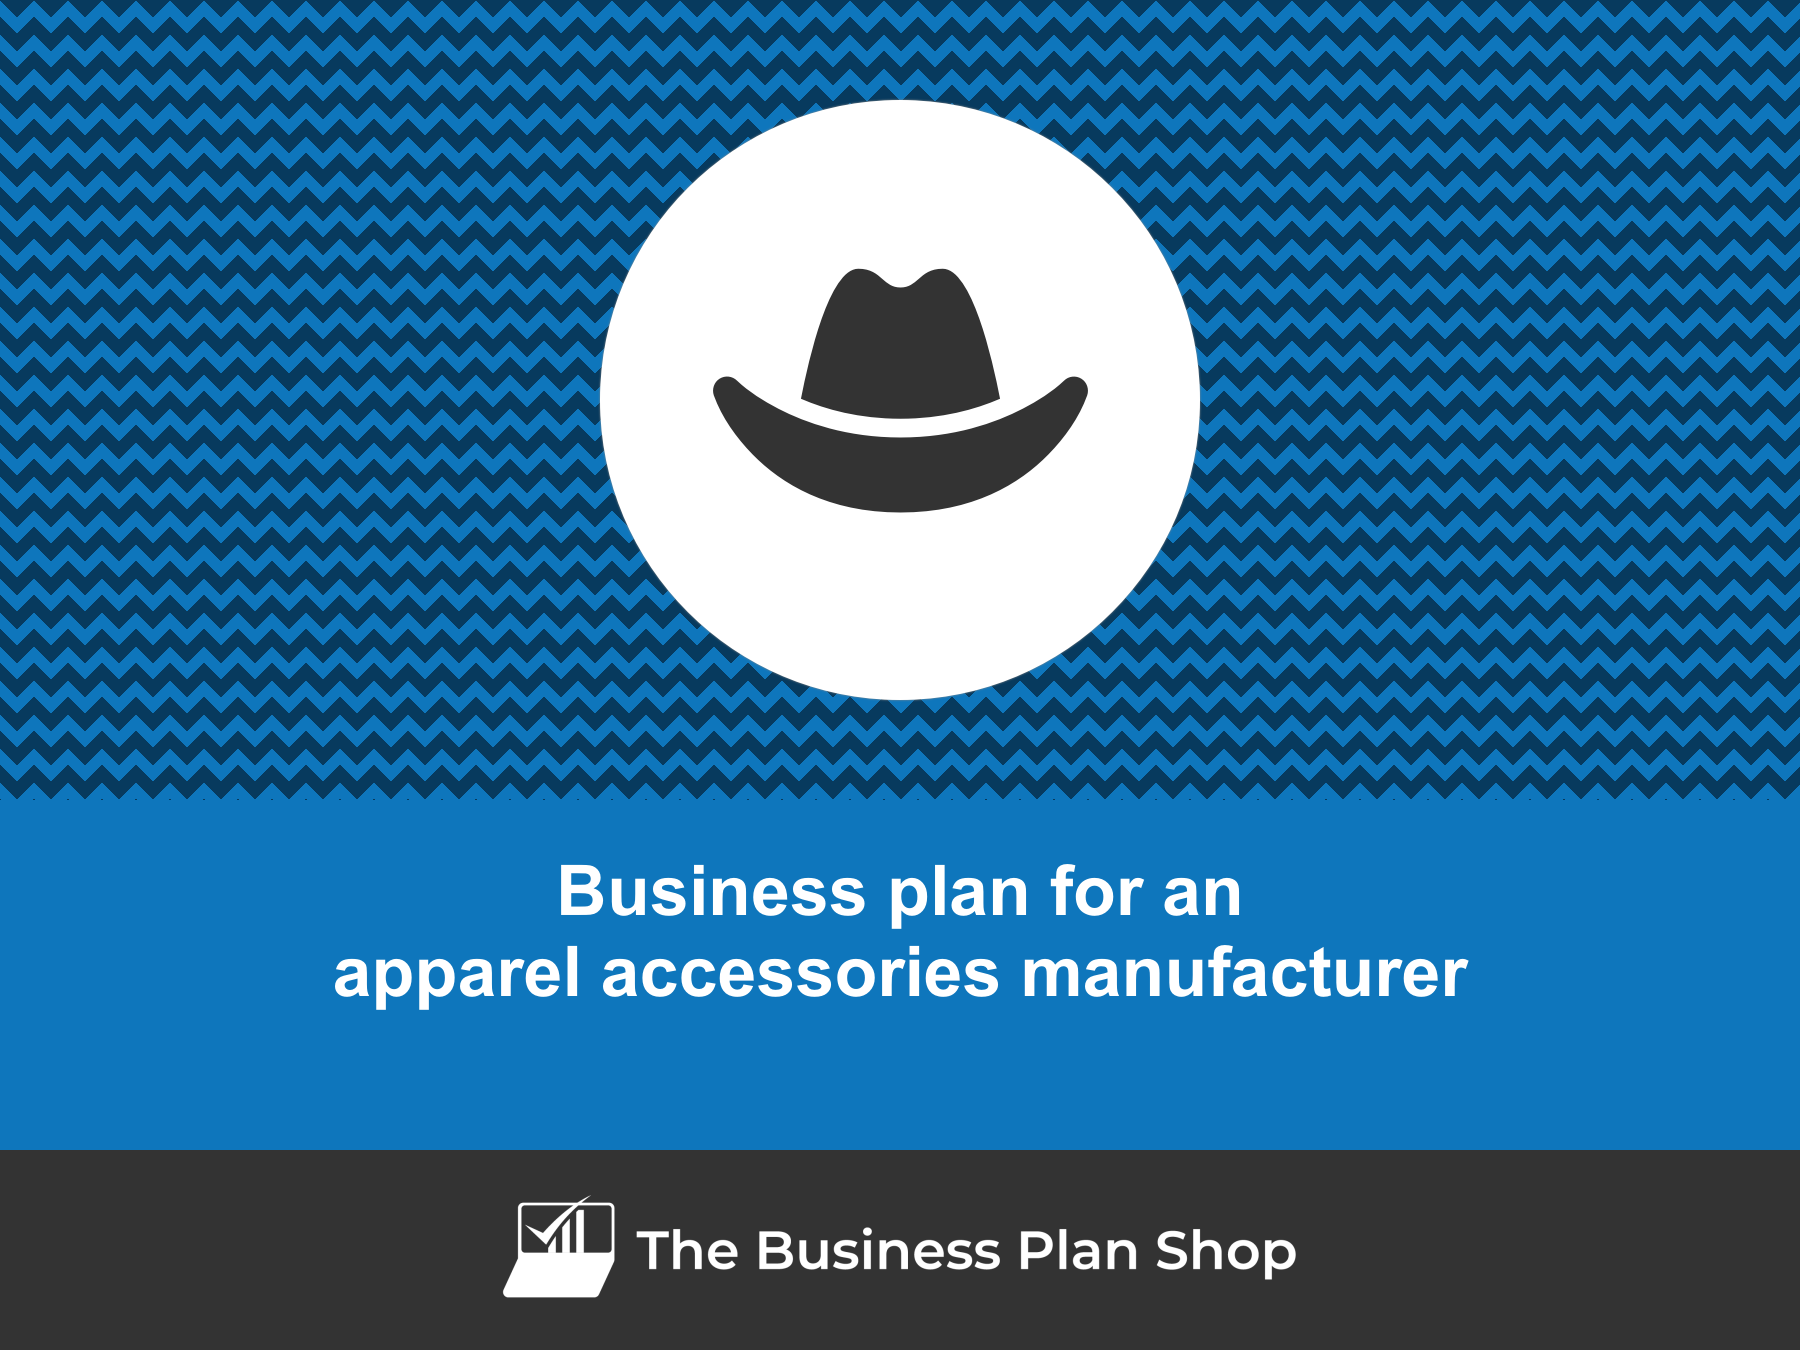 How to write a business plan for an apparel accessories manufacturer?